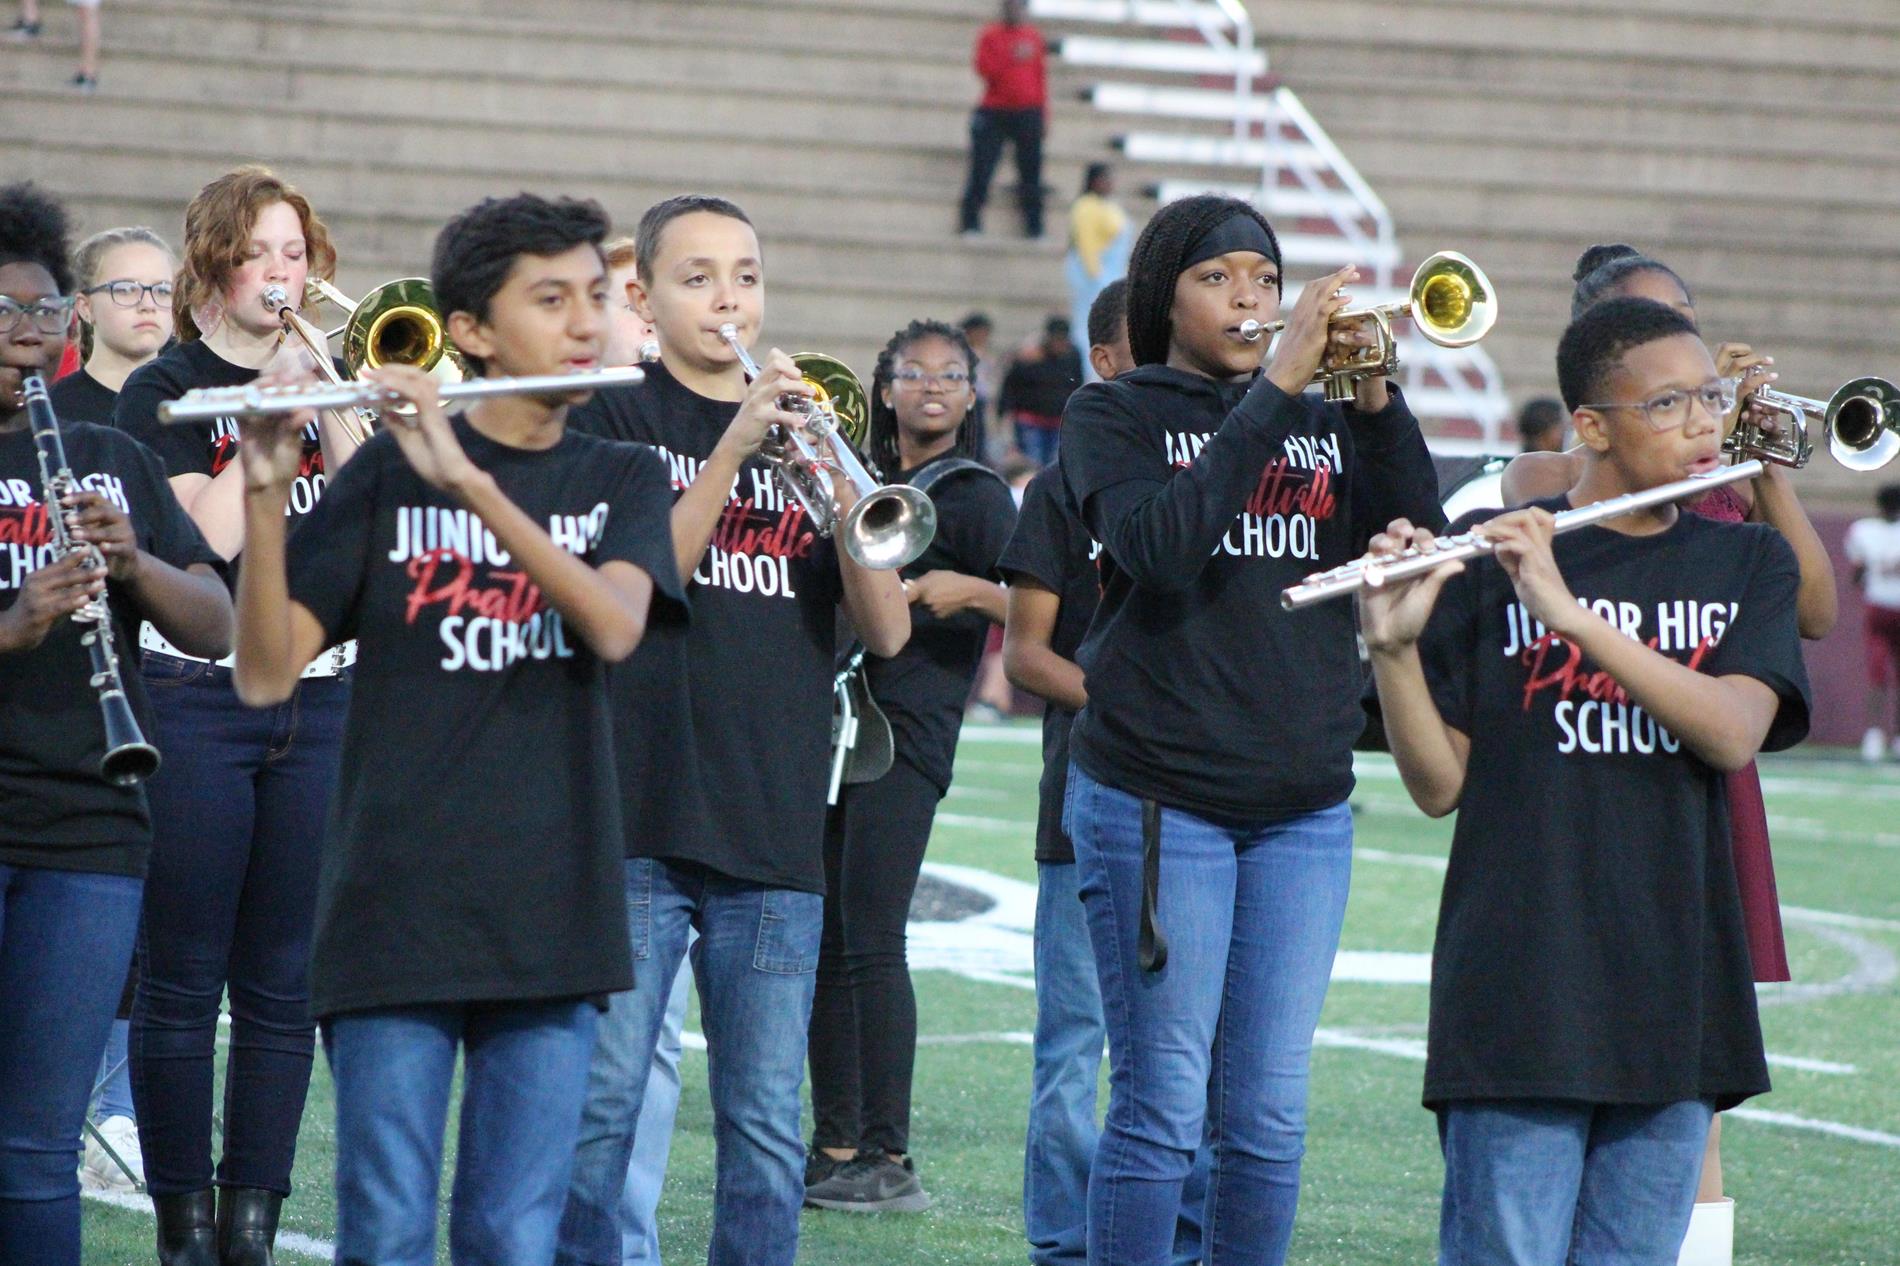 Pjhs band members playing assorted instruments at football game